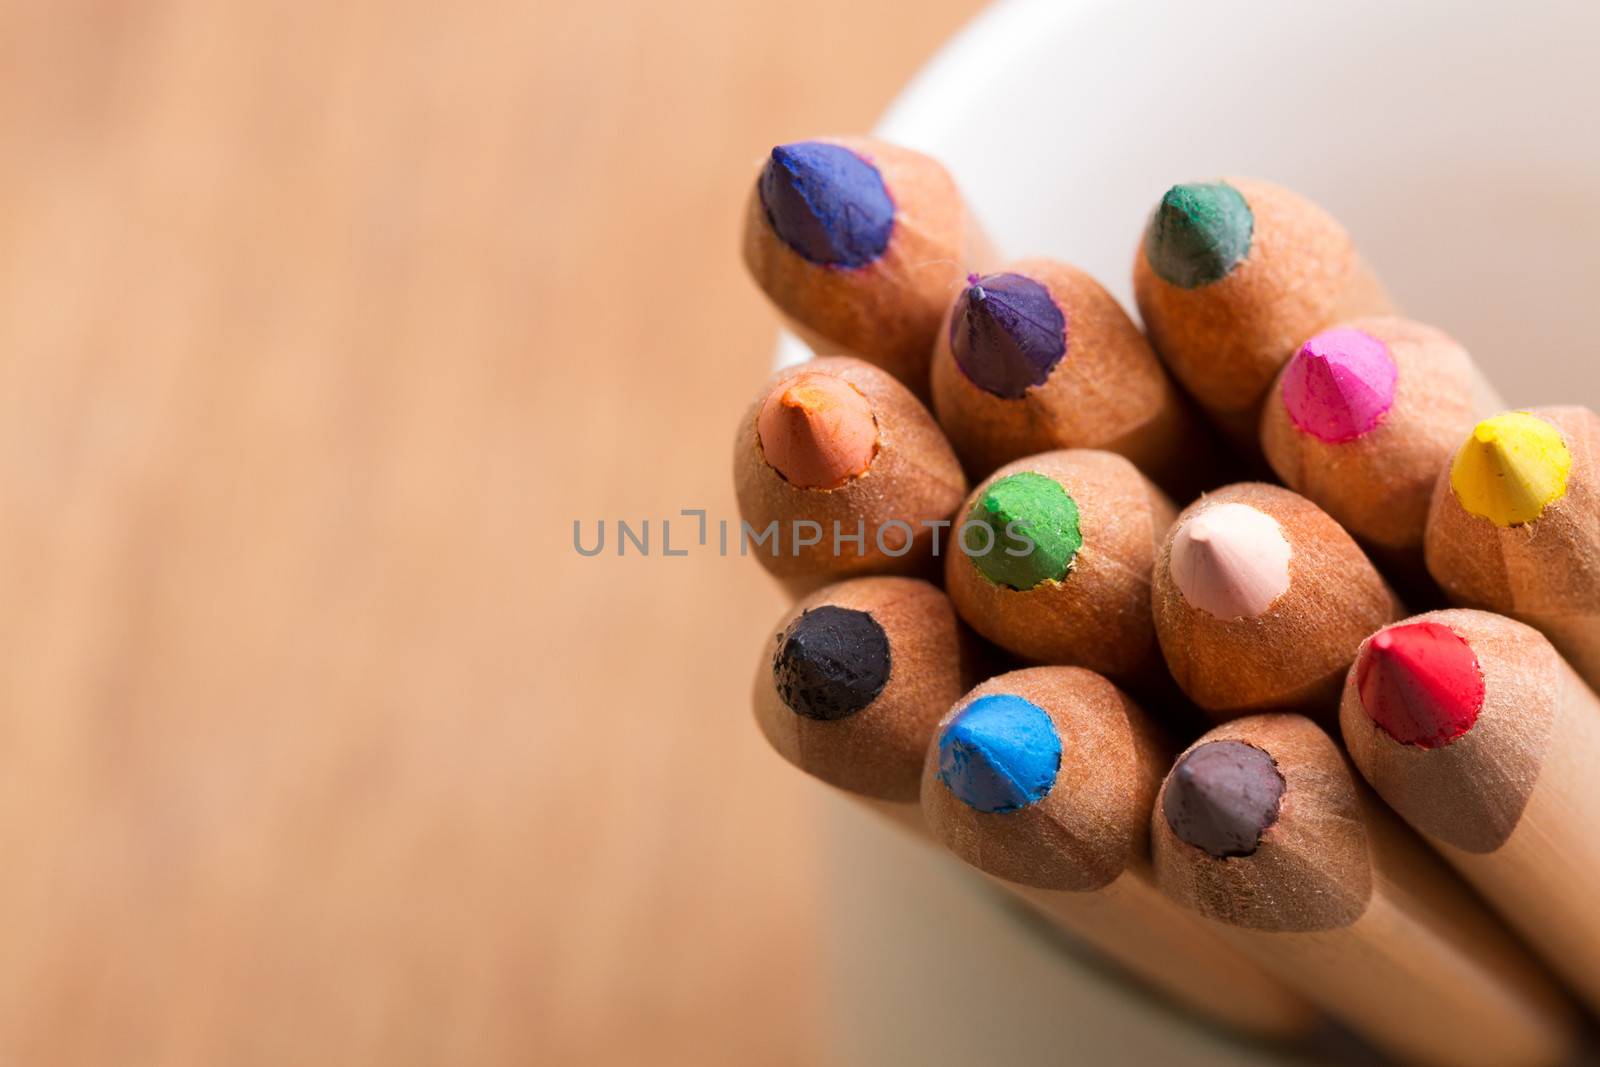 colored pencils with brown blurred background